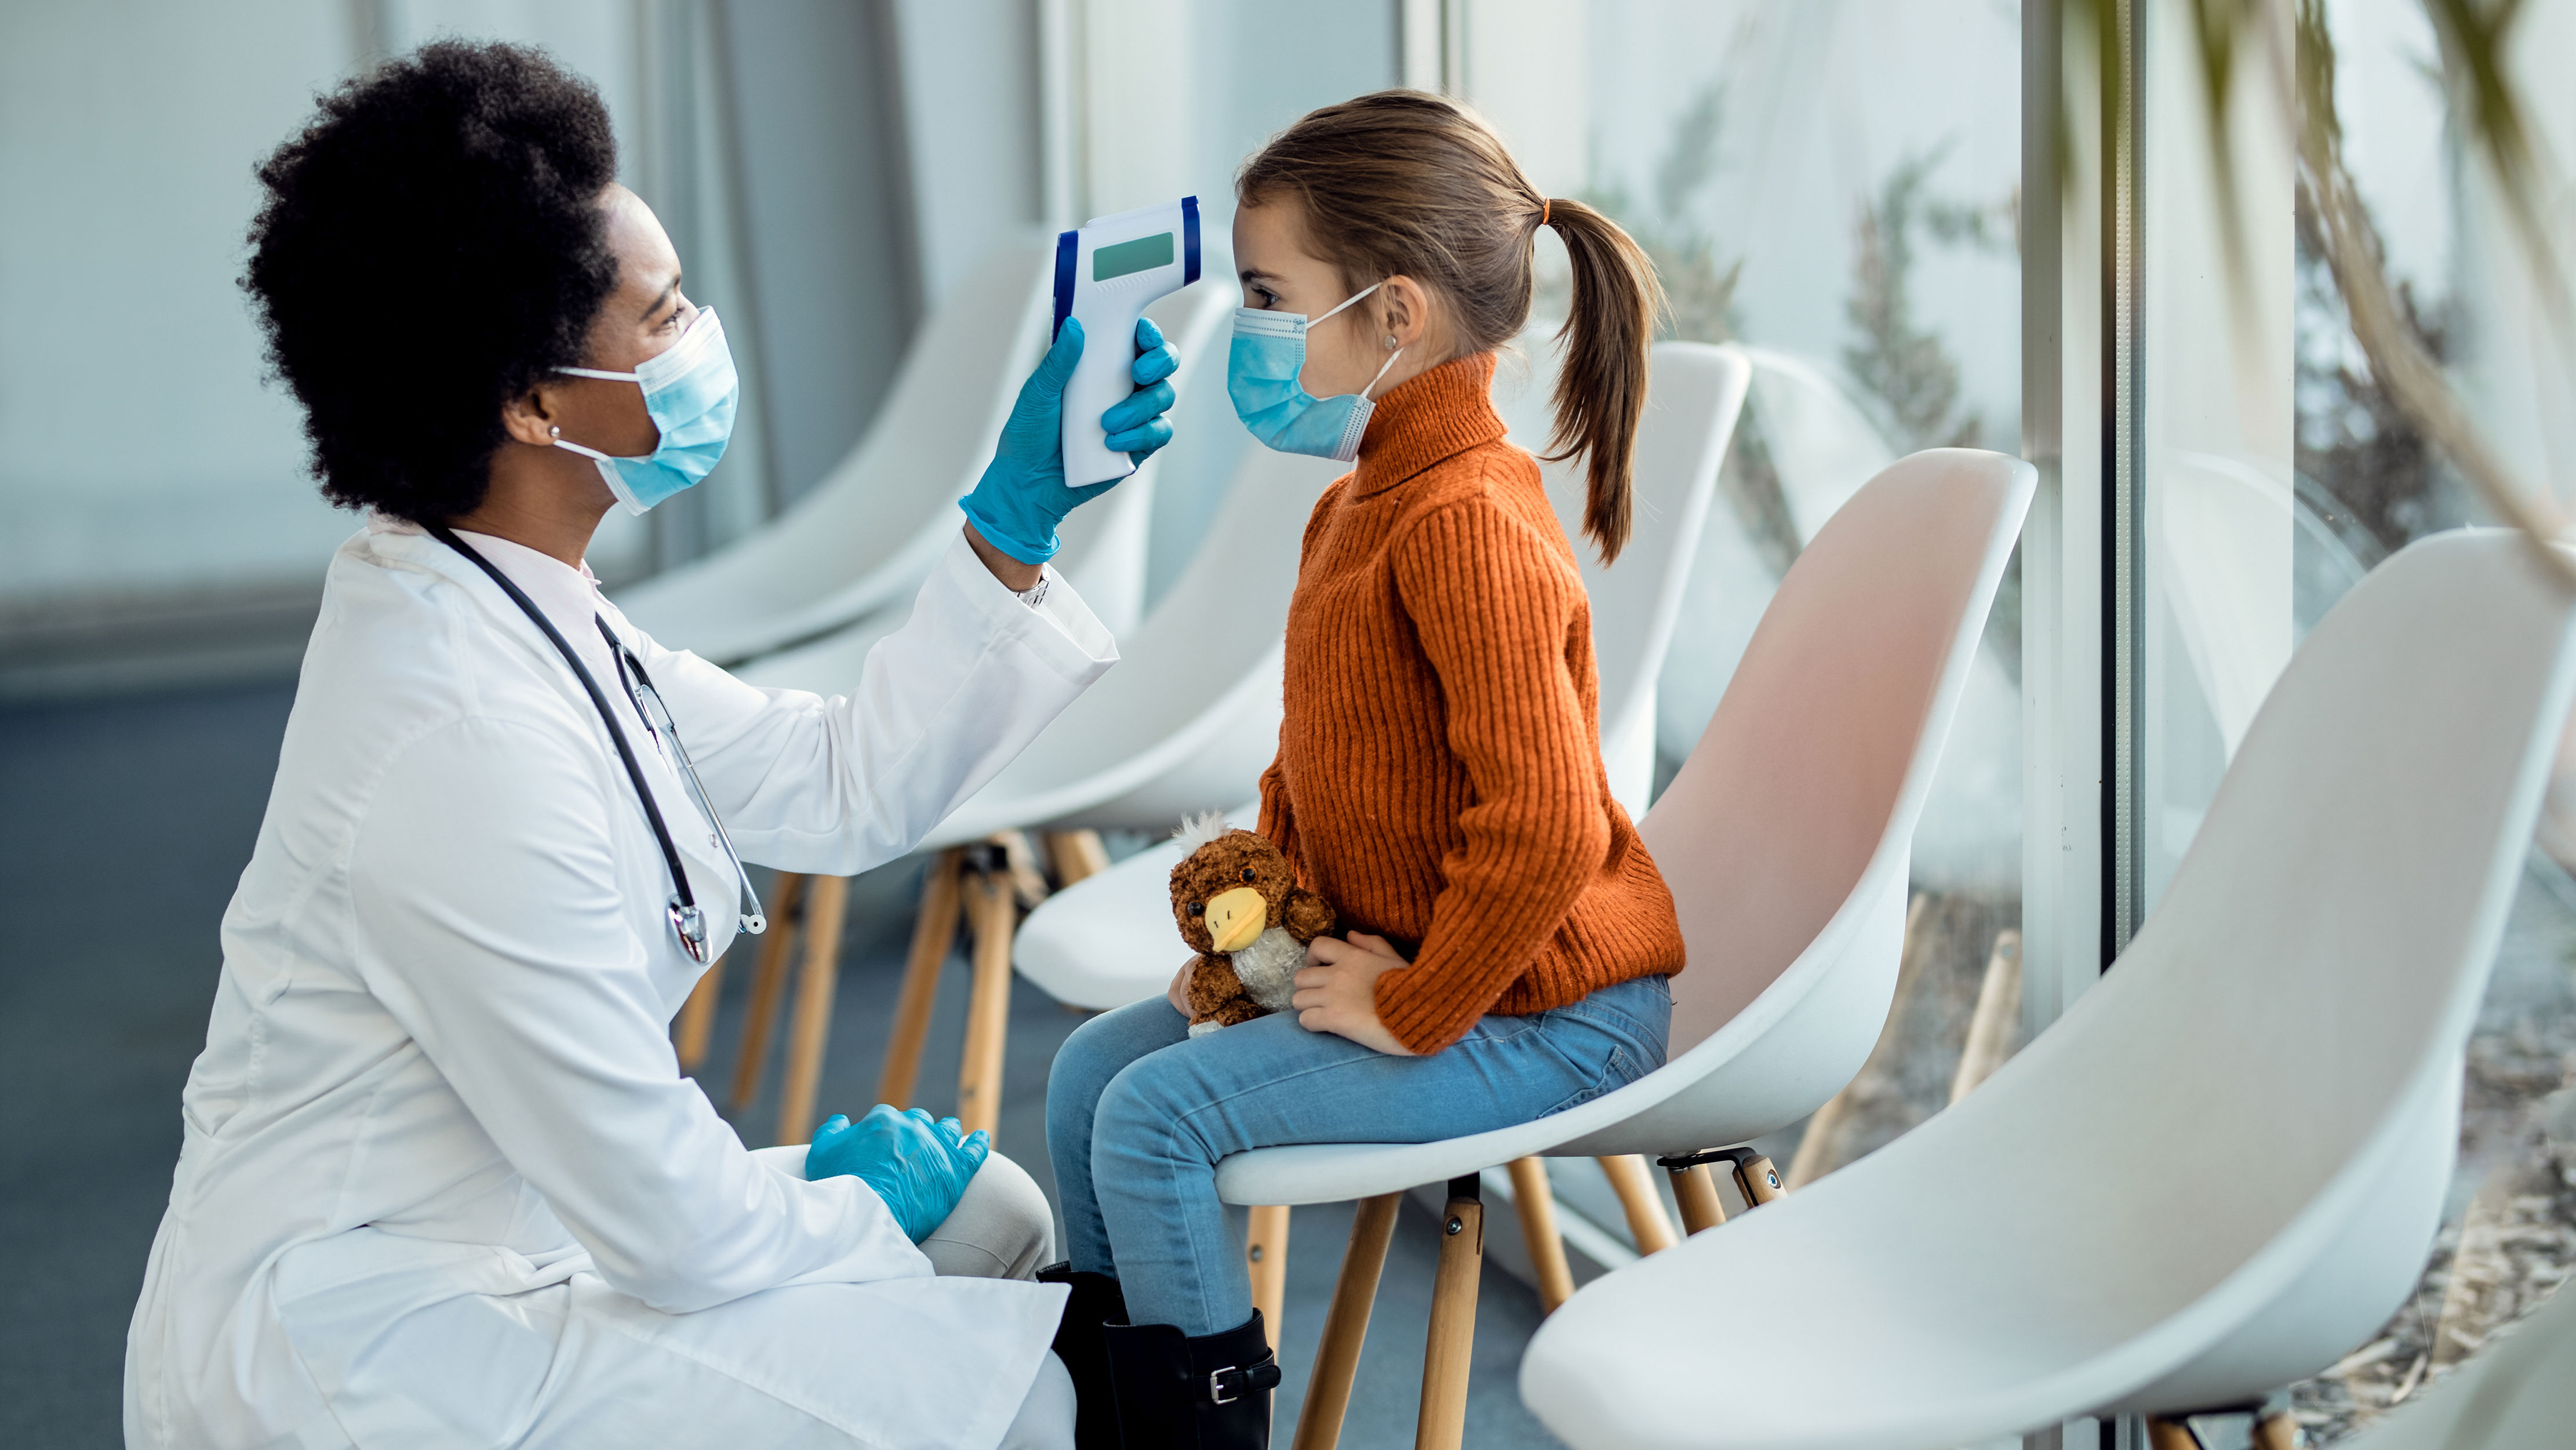 Masked female doctor takes temperature reading of masked girl in waiting room